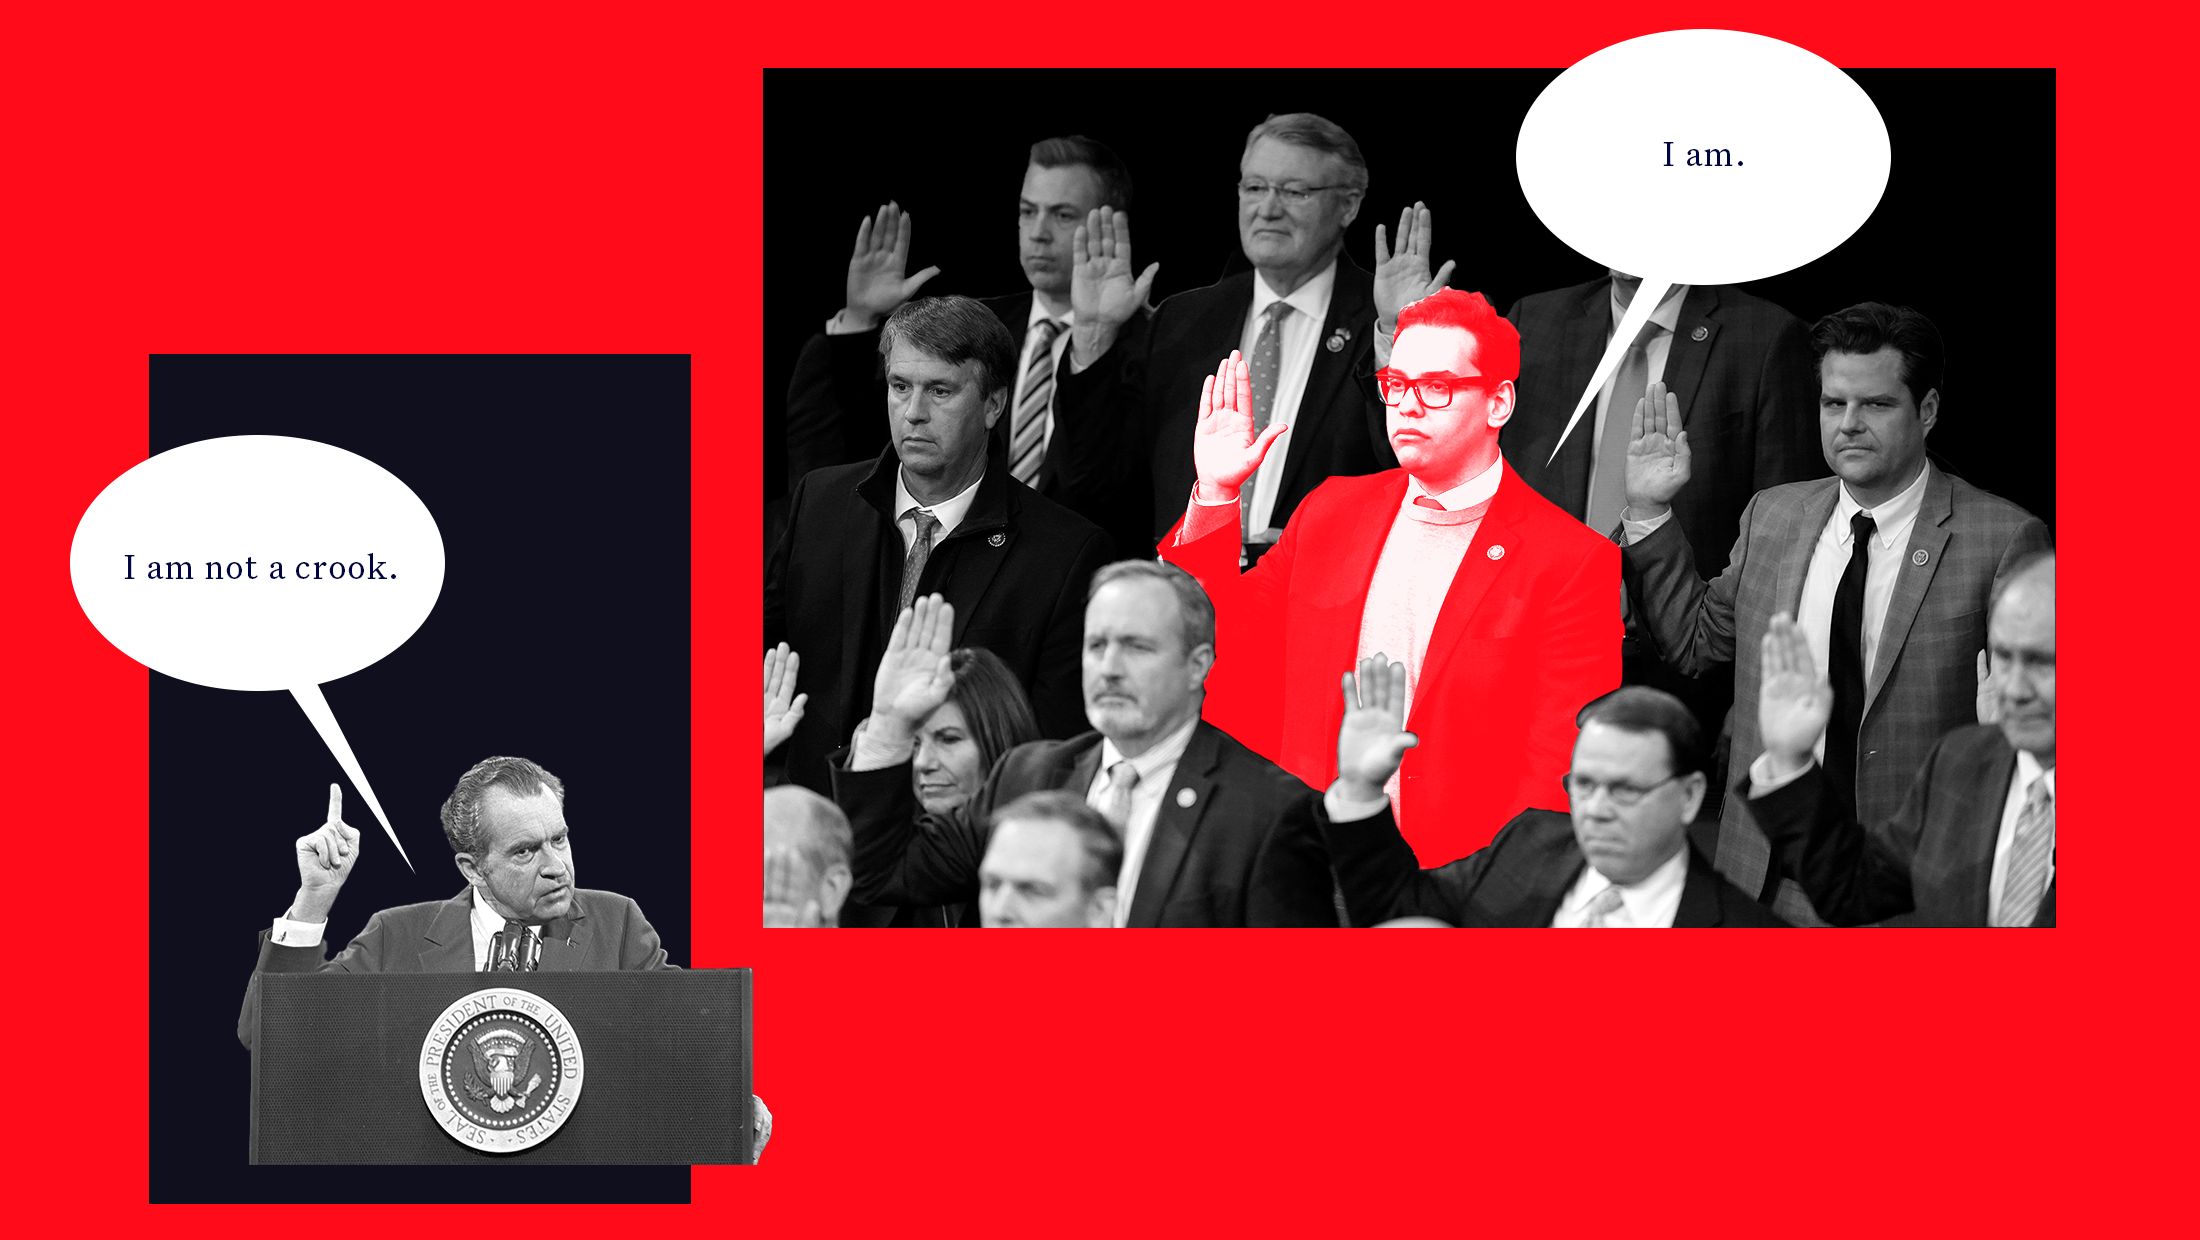 Red background with a black and white image of former President RIchard Nixon standing at a podium on the left with a text bubble that reads "I am not a crook" and to the right, a black and white image of members of Congress being sworn in with Rep. George Santos highlighted in red and a text bubble that reads "I am."